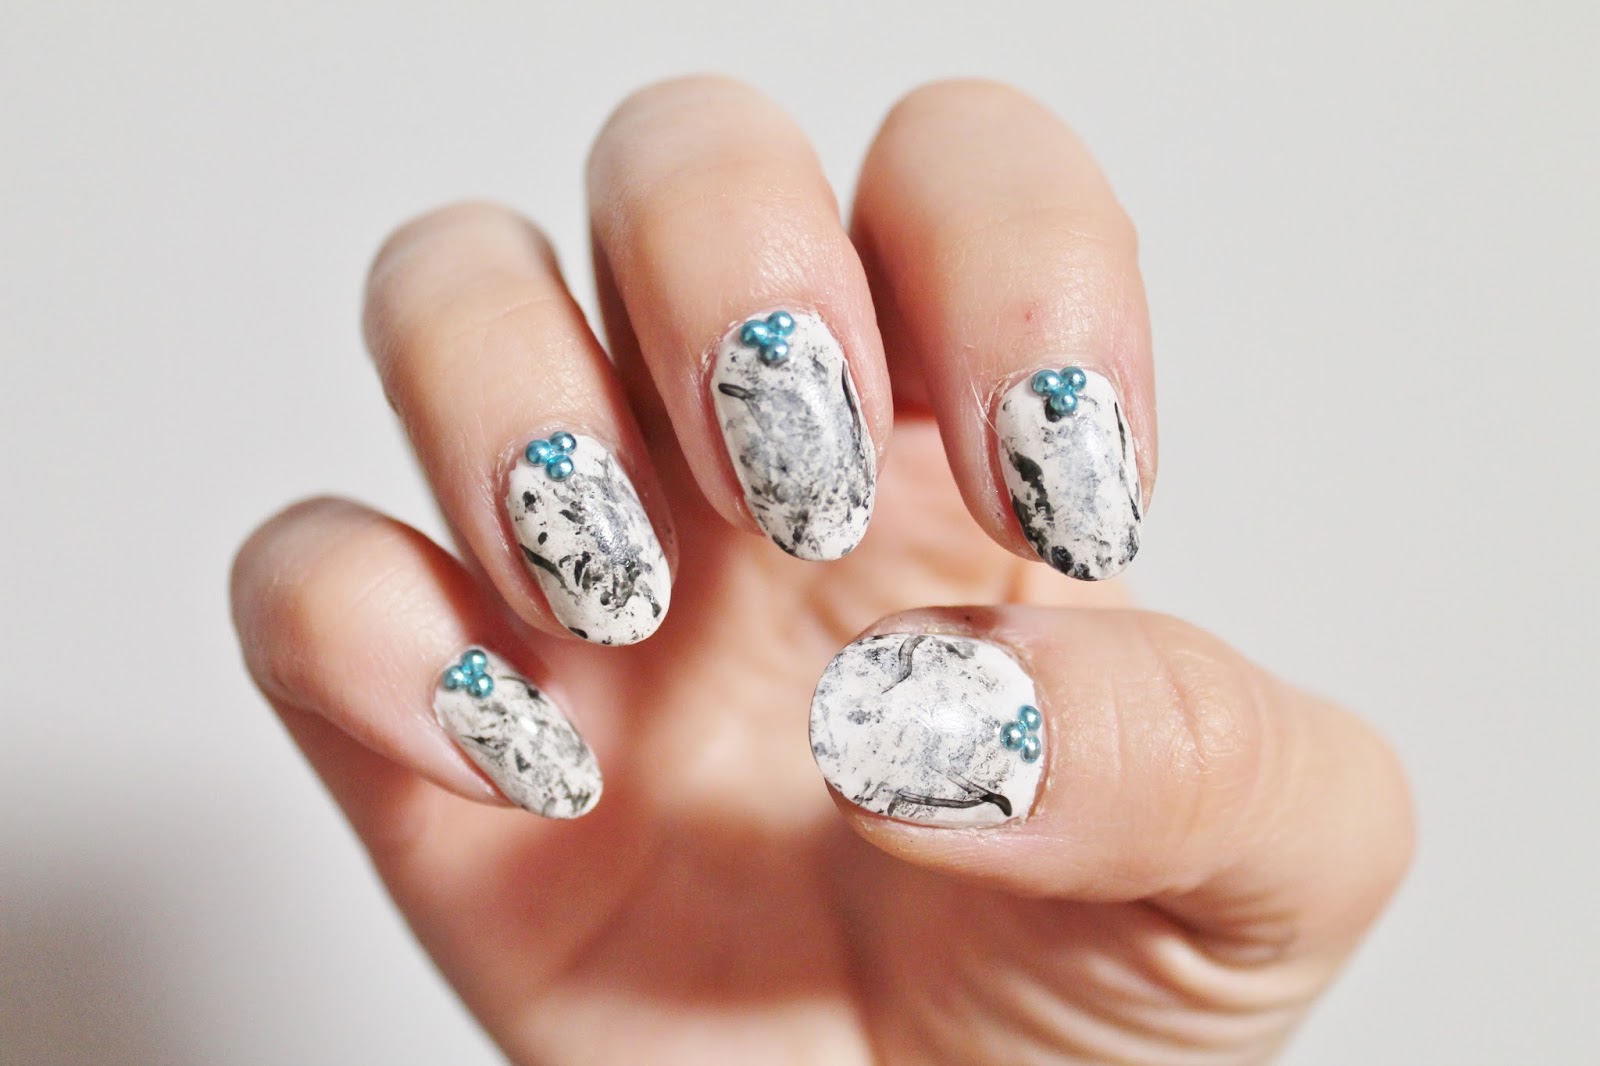 5. Paper Towel Marble Nail Art - wide 5